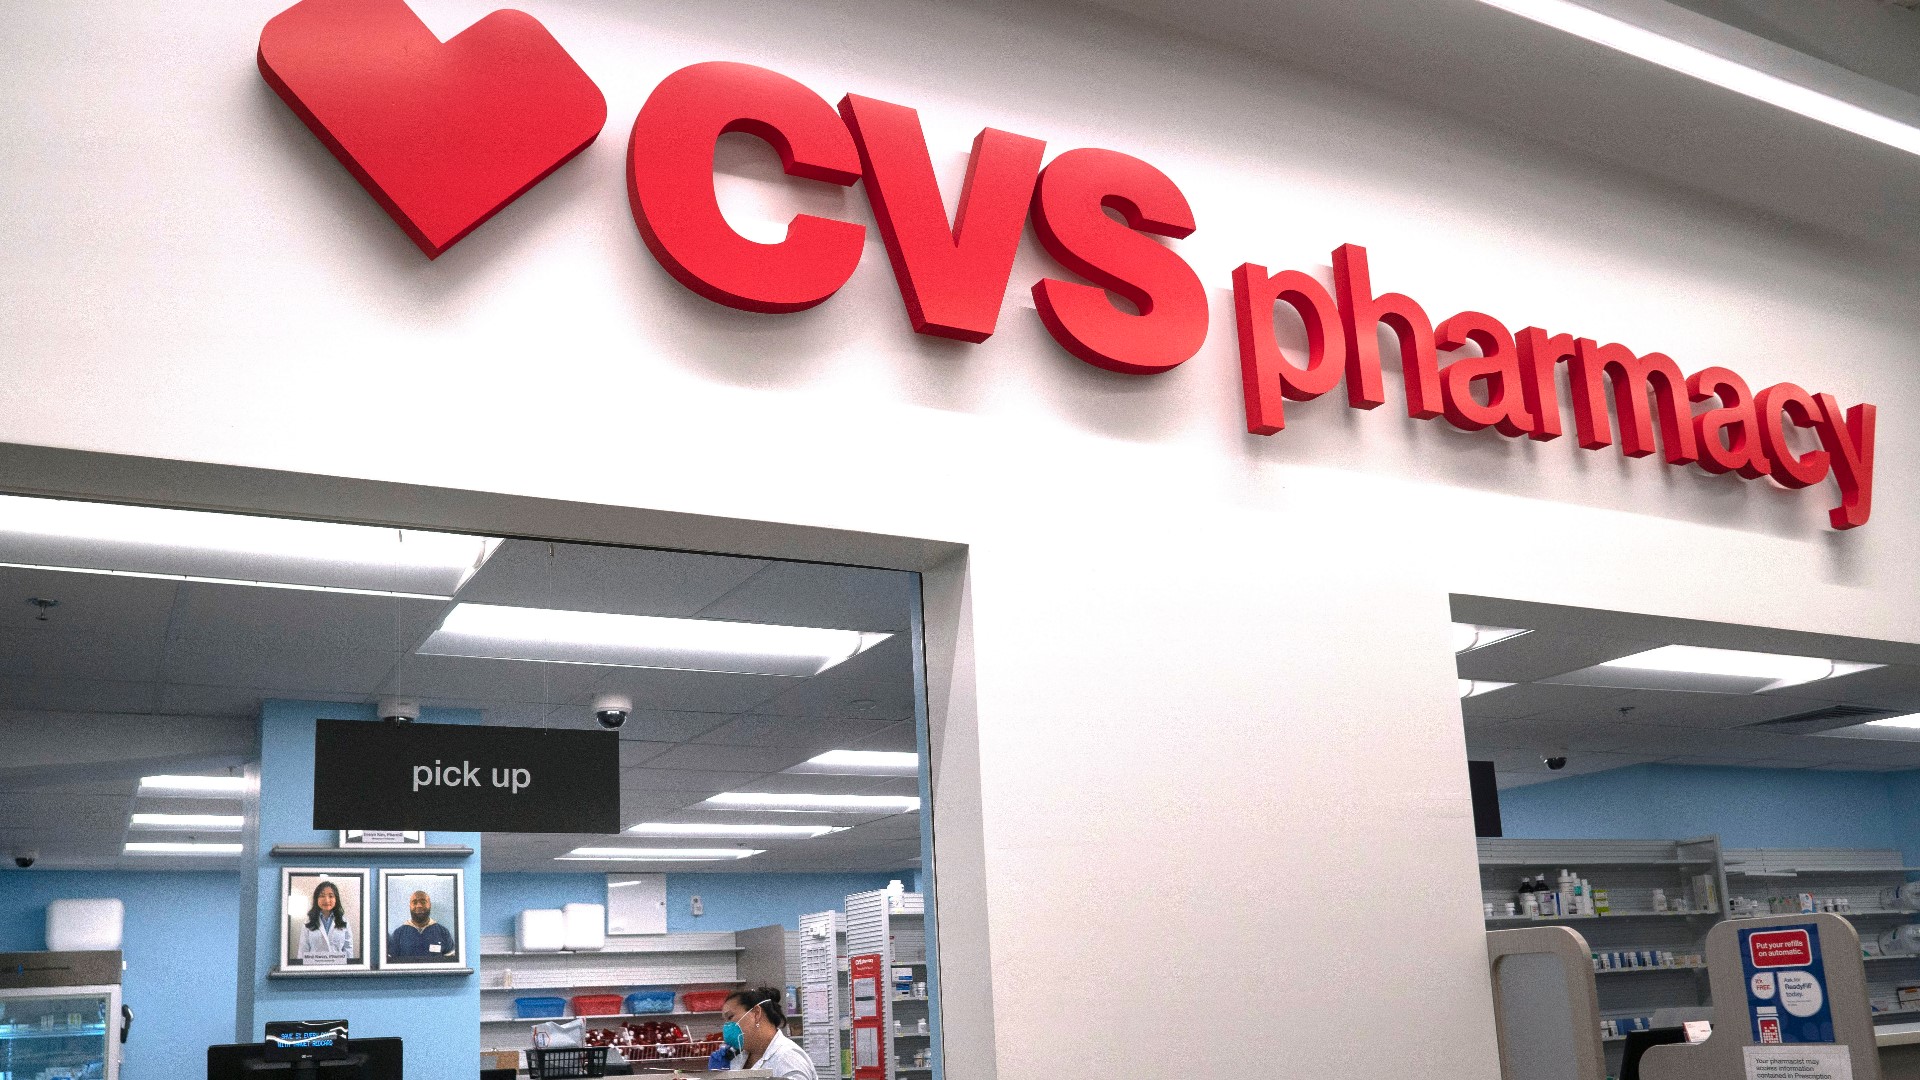 CVS has recently announced that four of its DC locations are going to close – including one that employees told us had been robbed several times.